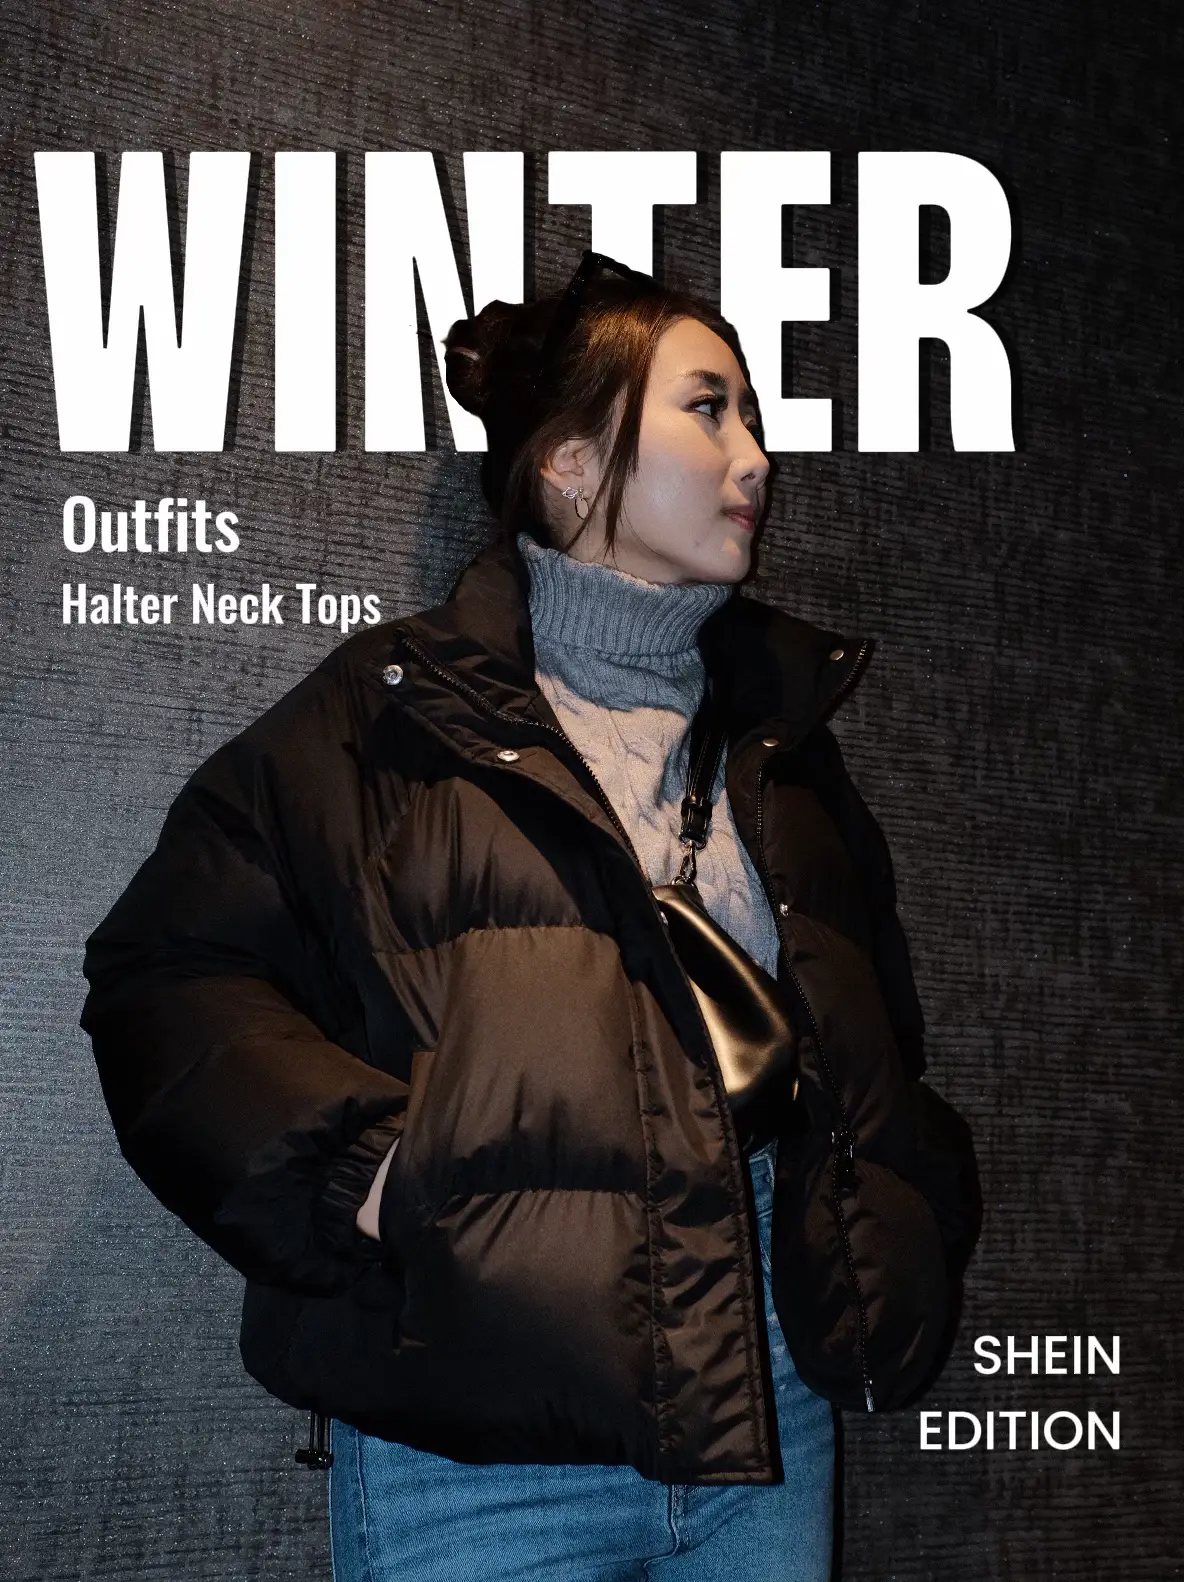 ❄️ WINTER OUTFITS FROM SHEIN ❄️ (TOPS), Gallery posted by Zara Lim 💜